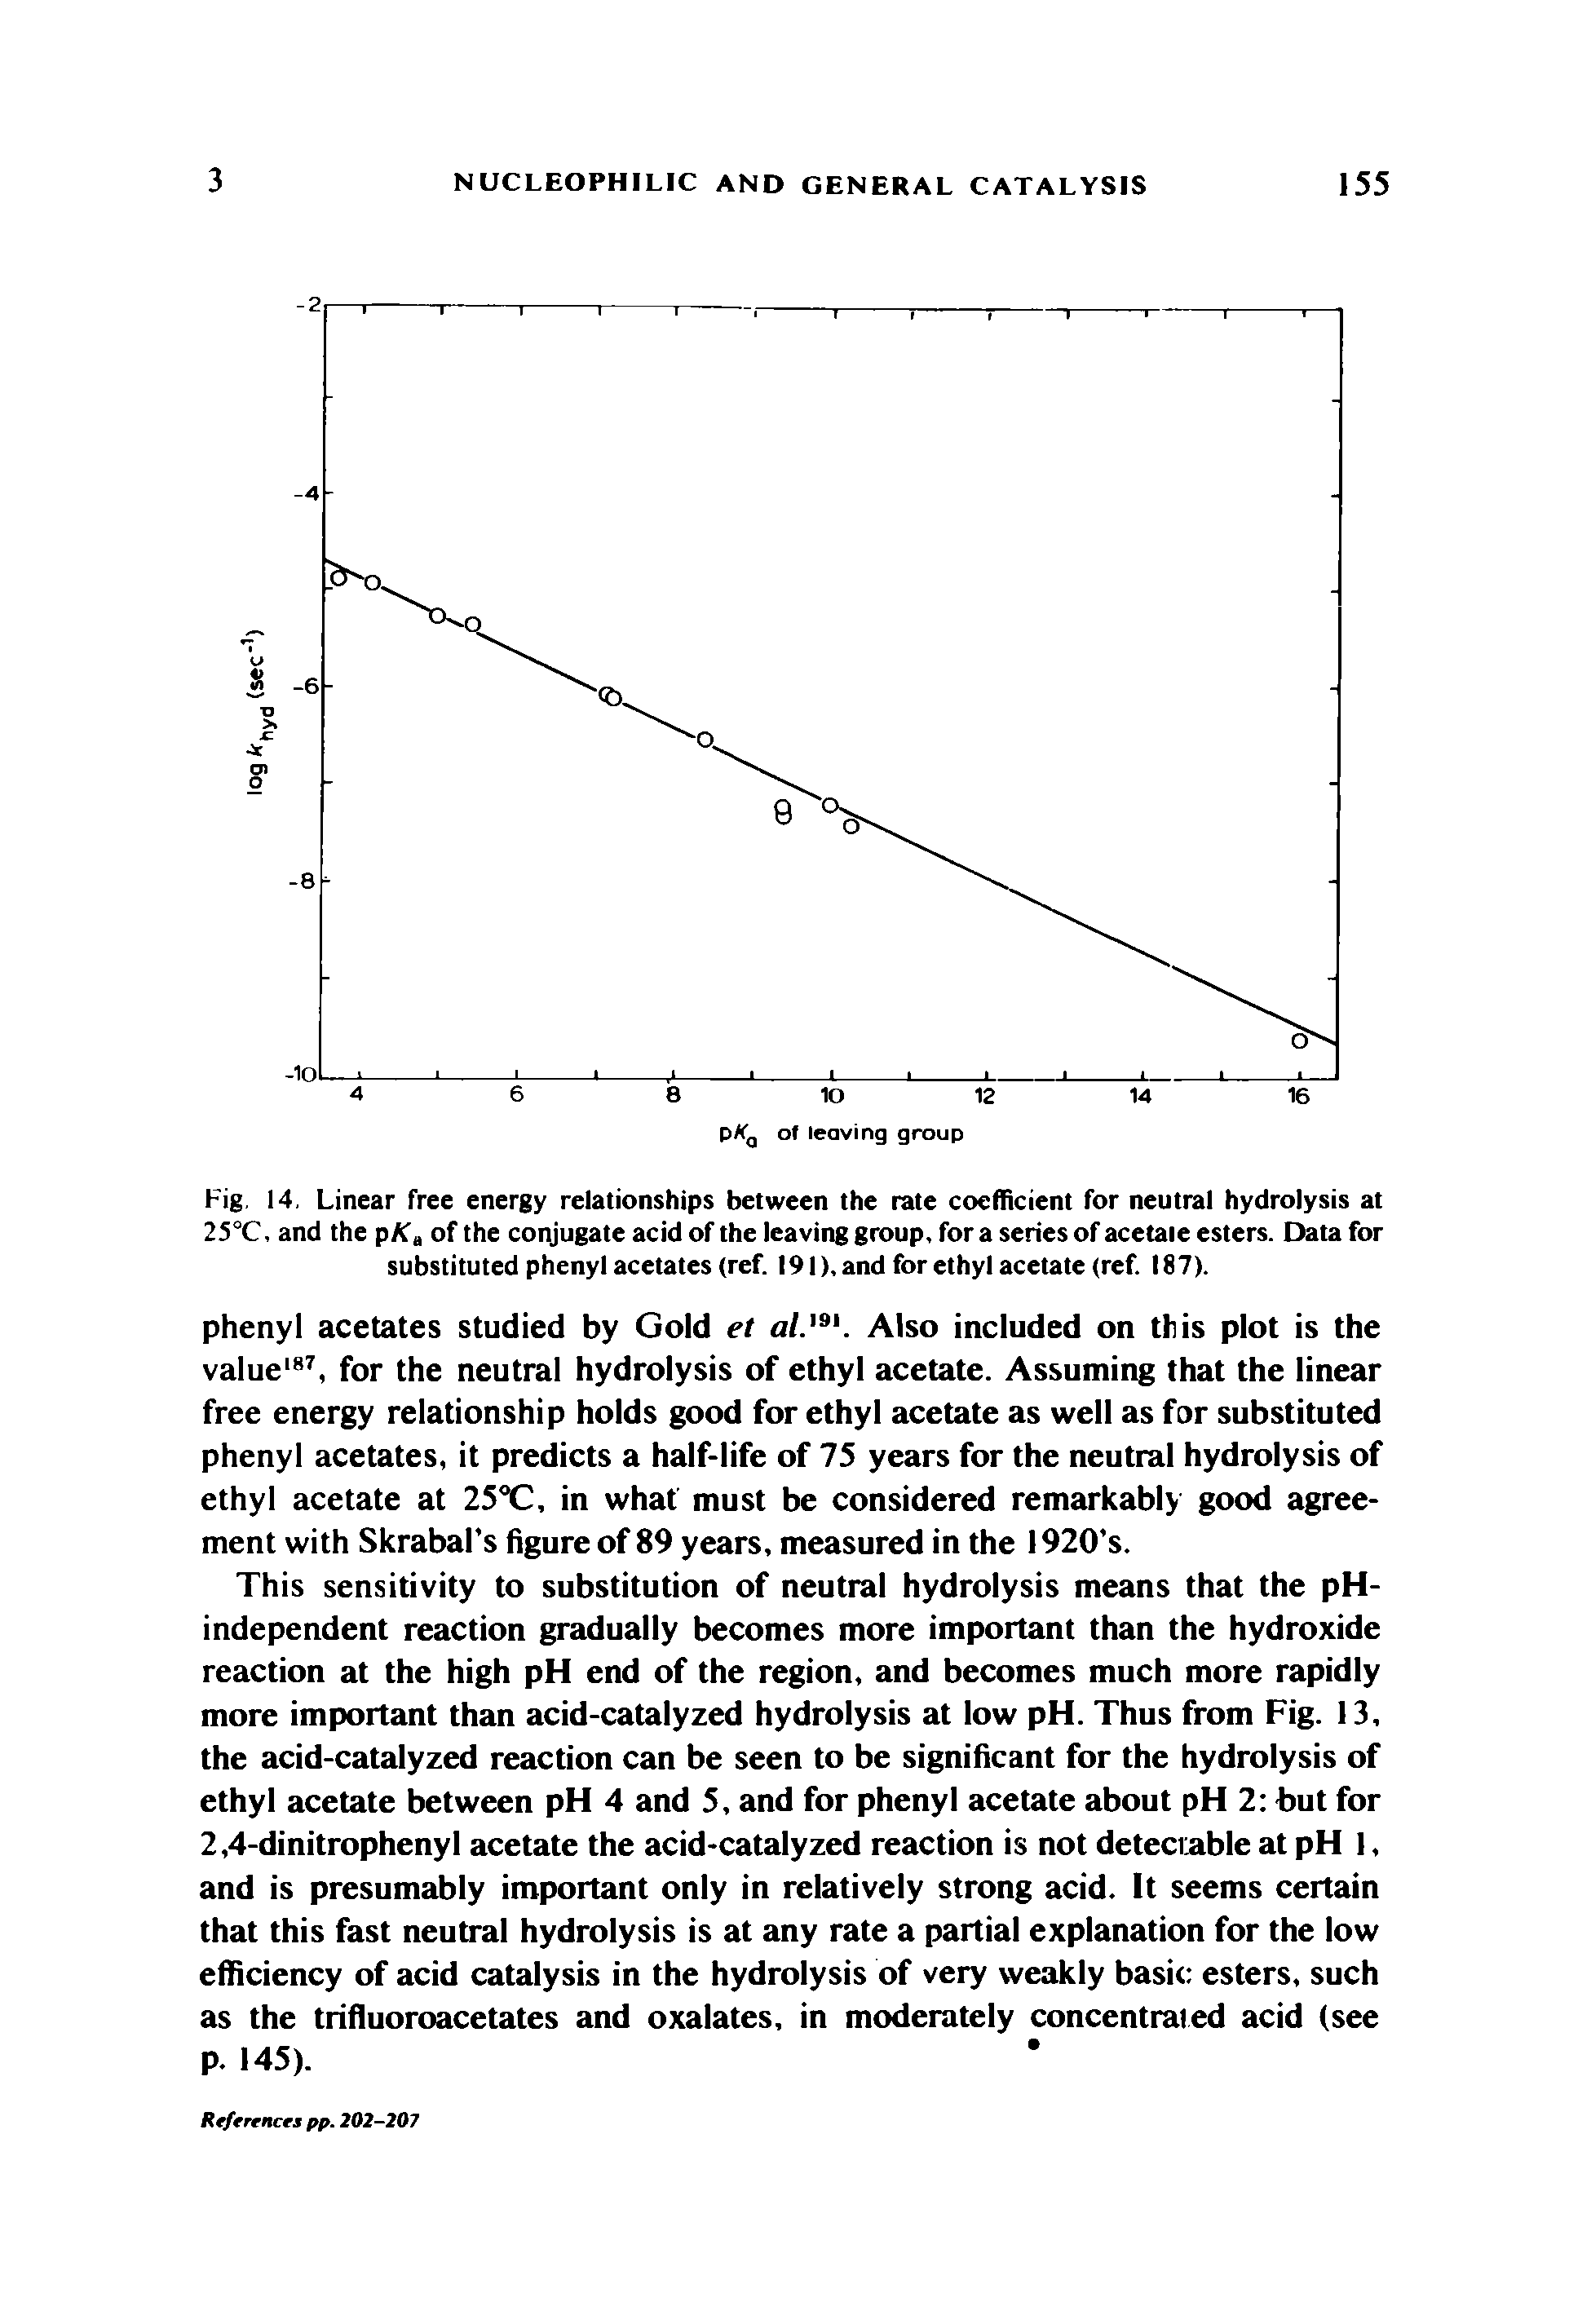 Fig. 14, Linear free energy relationships between the rate coefficient for neutral hydrolysis at 25°C. and the pKa of the conjugate acid of the leaving group, for a series of acetate esters. Data for substituted phenyl acetates (ref. 191), and for ethyl acetate (ref. 187).